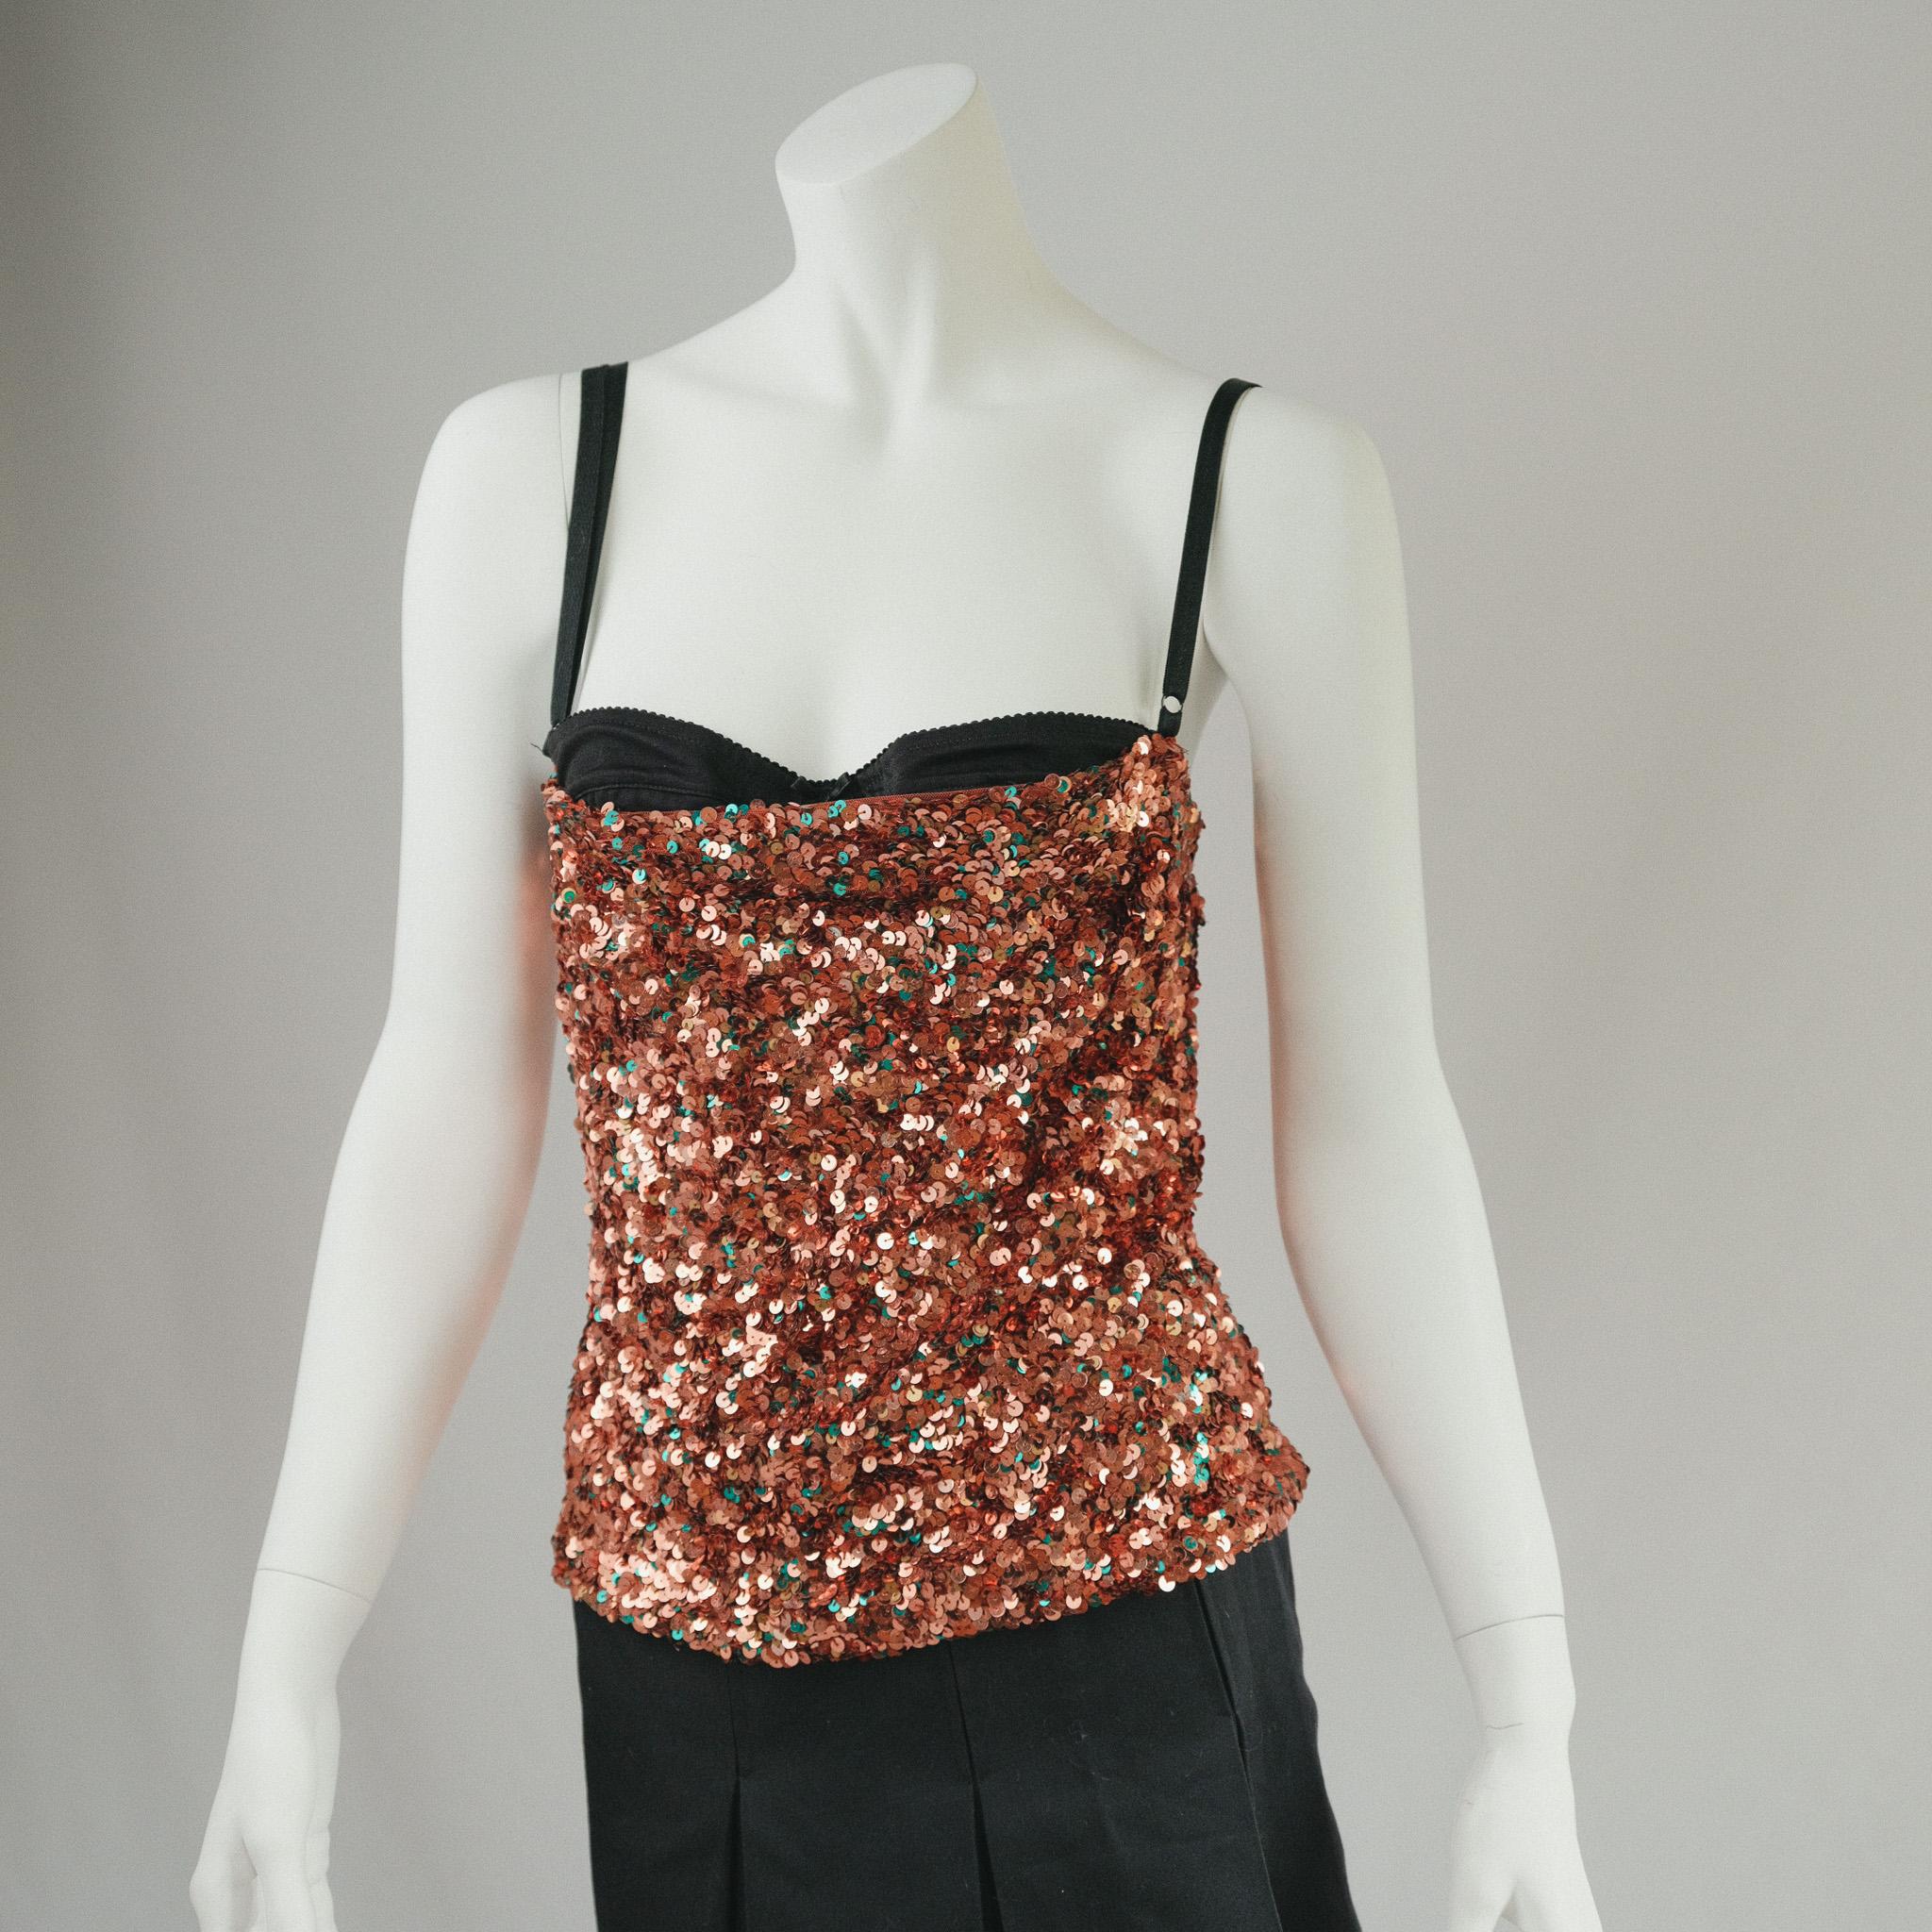 90s Vintage Dolce and Gabbana Bronze  sequin corset top featuring exposed bra detail, black adjustable straps, and center back zipper closure. 

exquisite, would keep if this fit me 


Size: 40 UK10 
Pictured on size 6 UK pinned 

Very Good Vintage